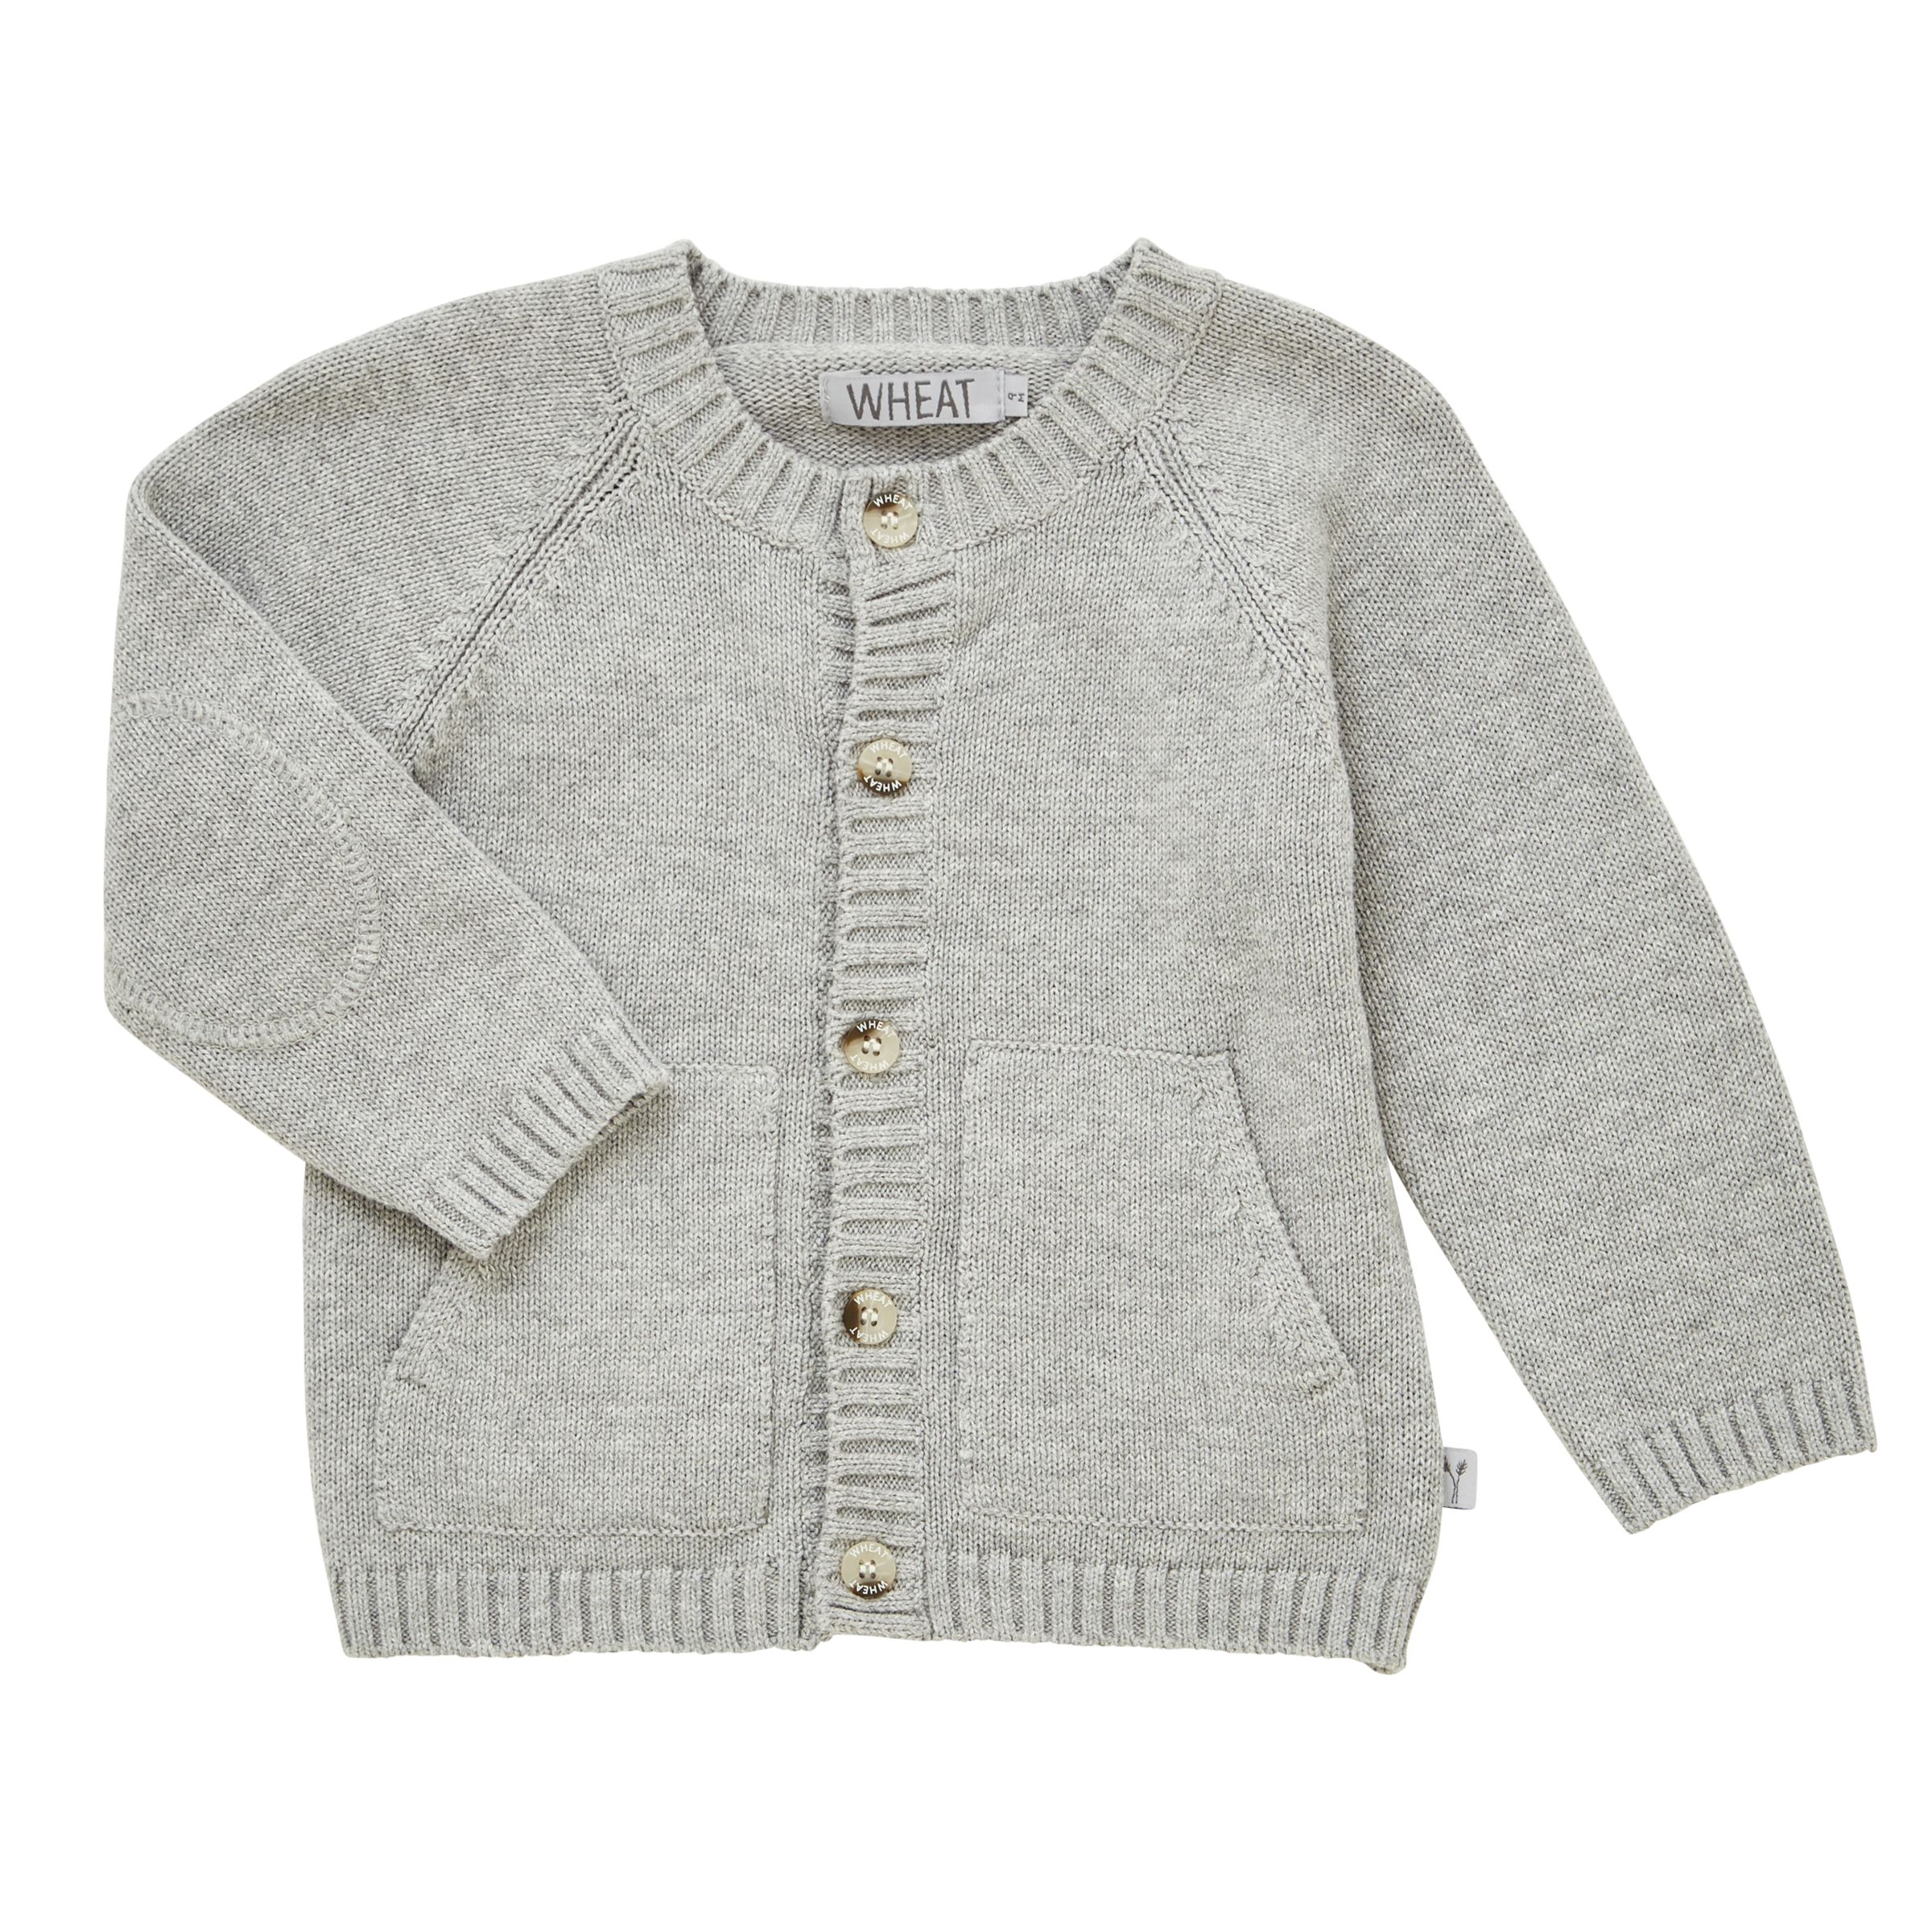 Wheat Baby Knitted Cardigan, Grey at 